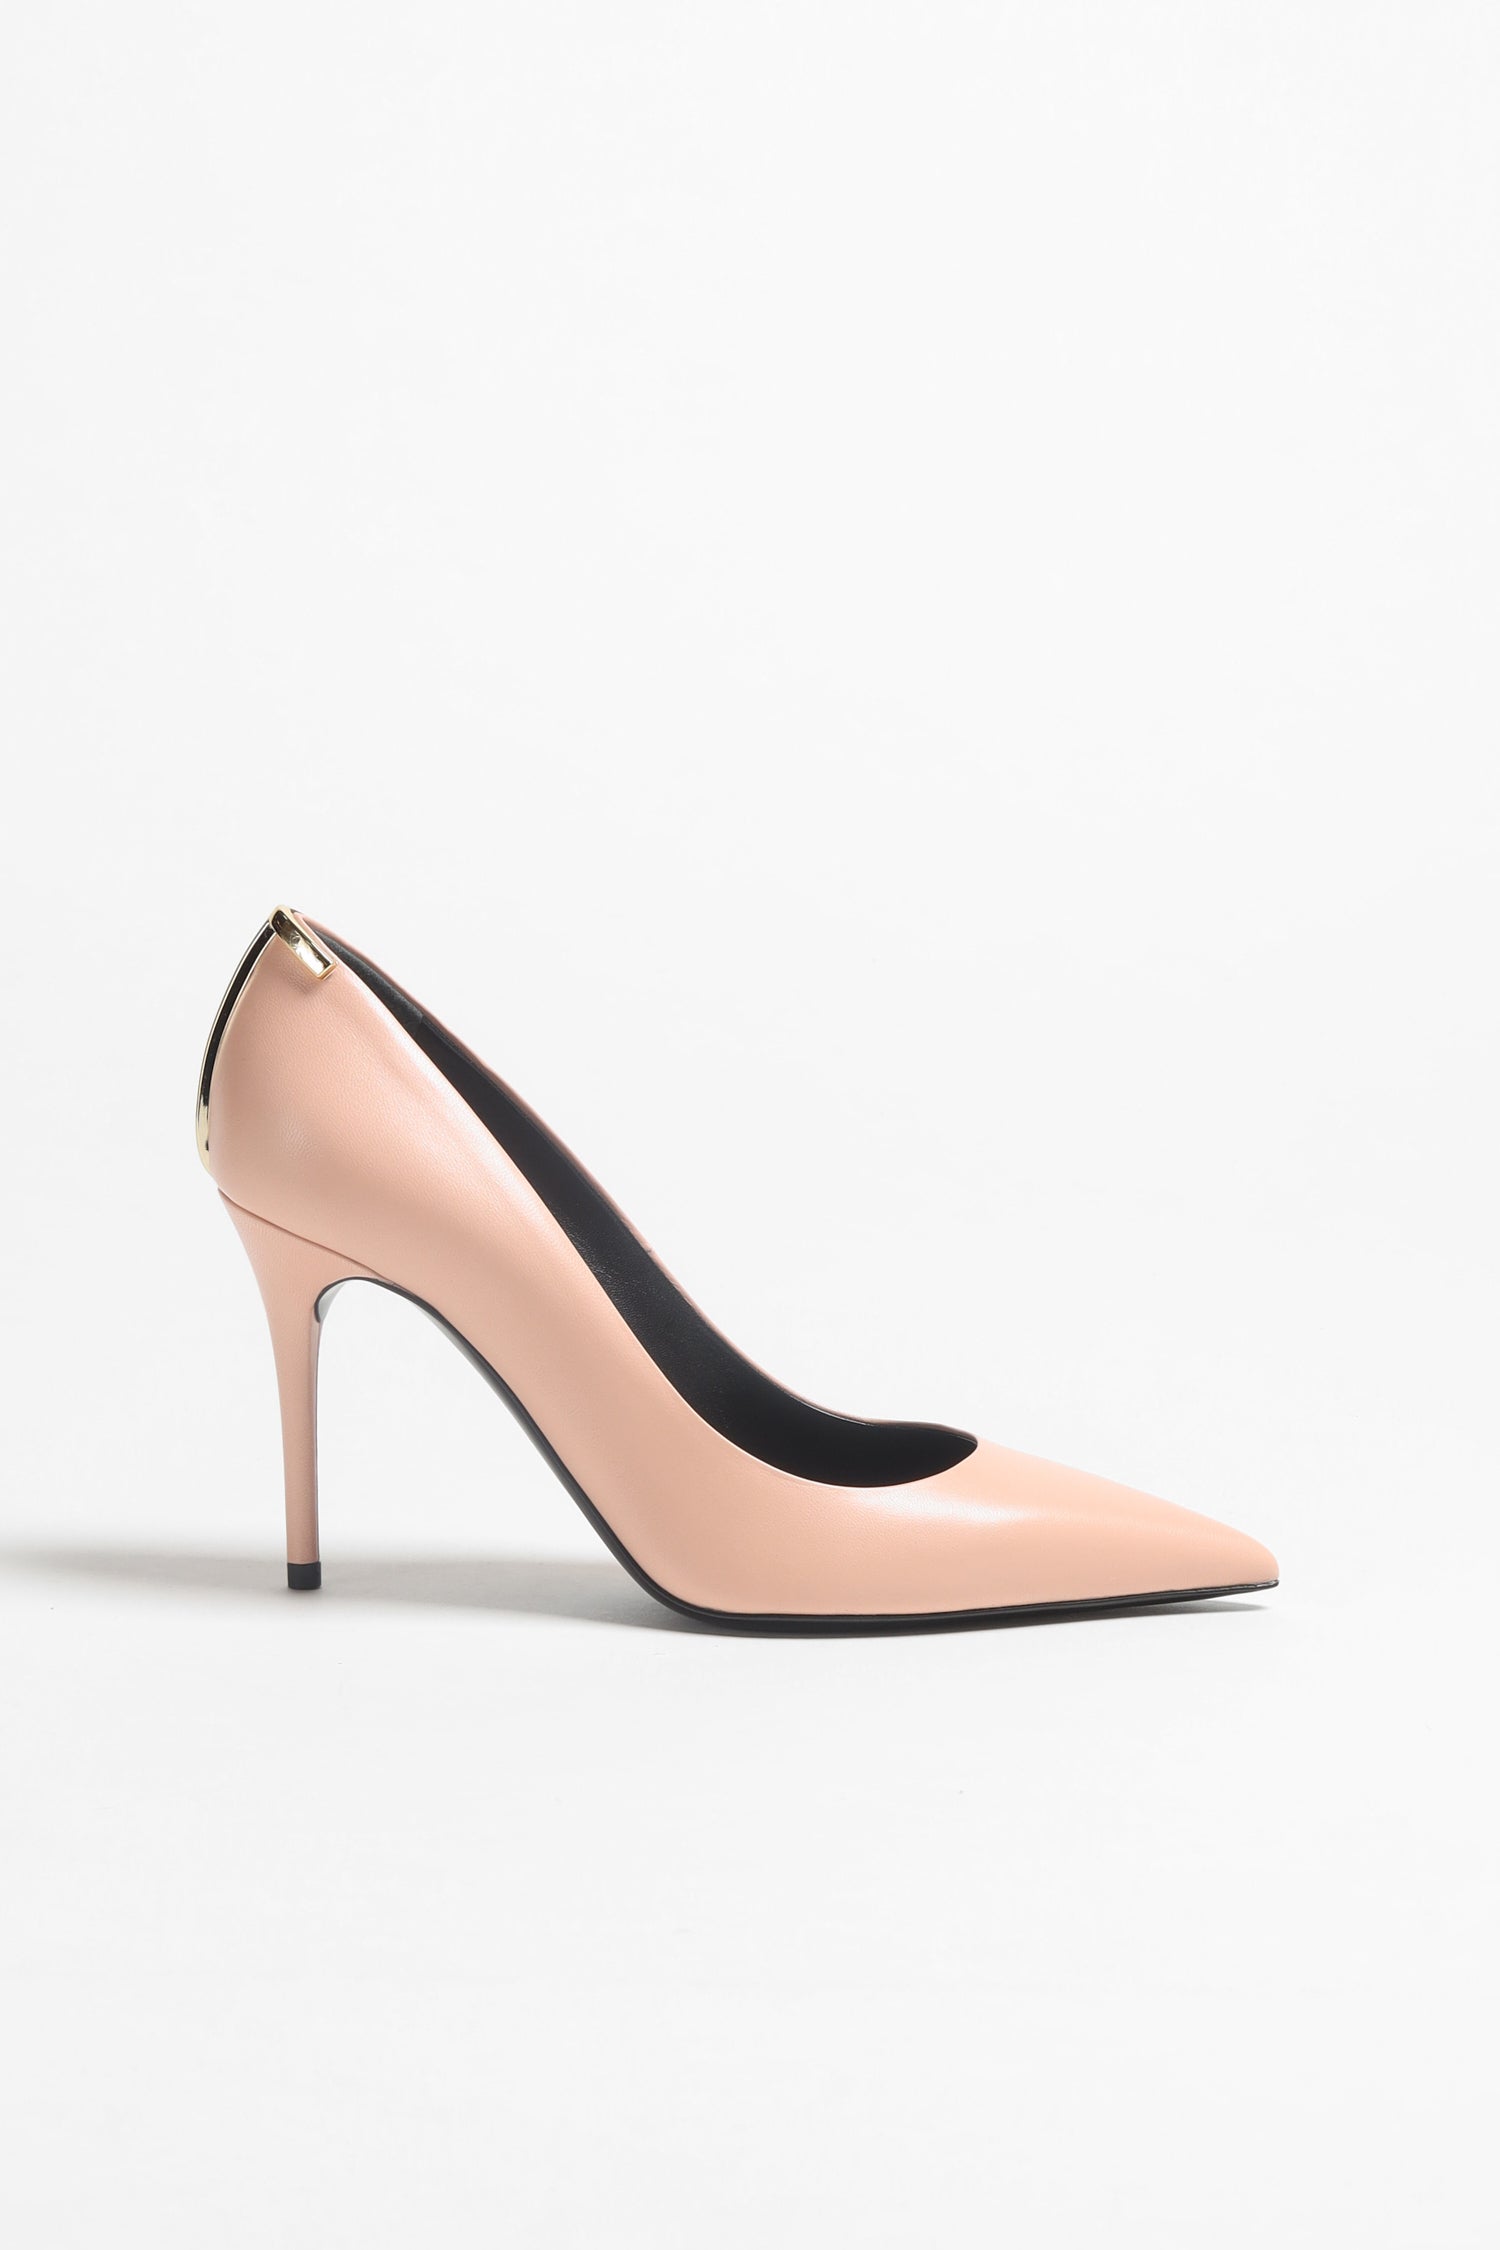 Pumps Iconic T in Iced NudeTom Ford - Anita Hass